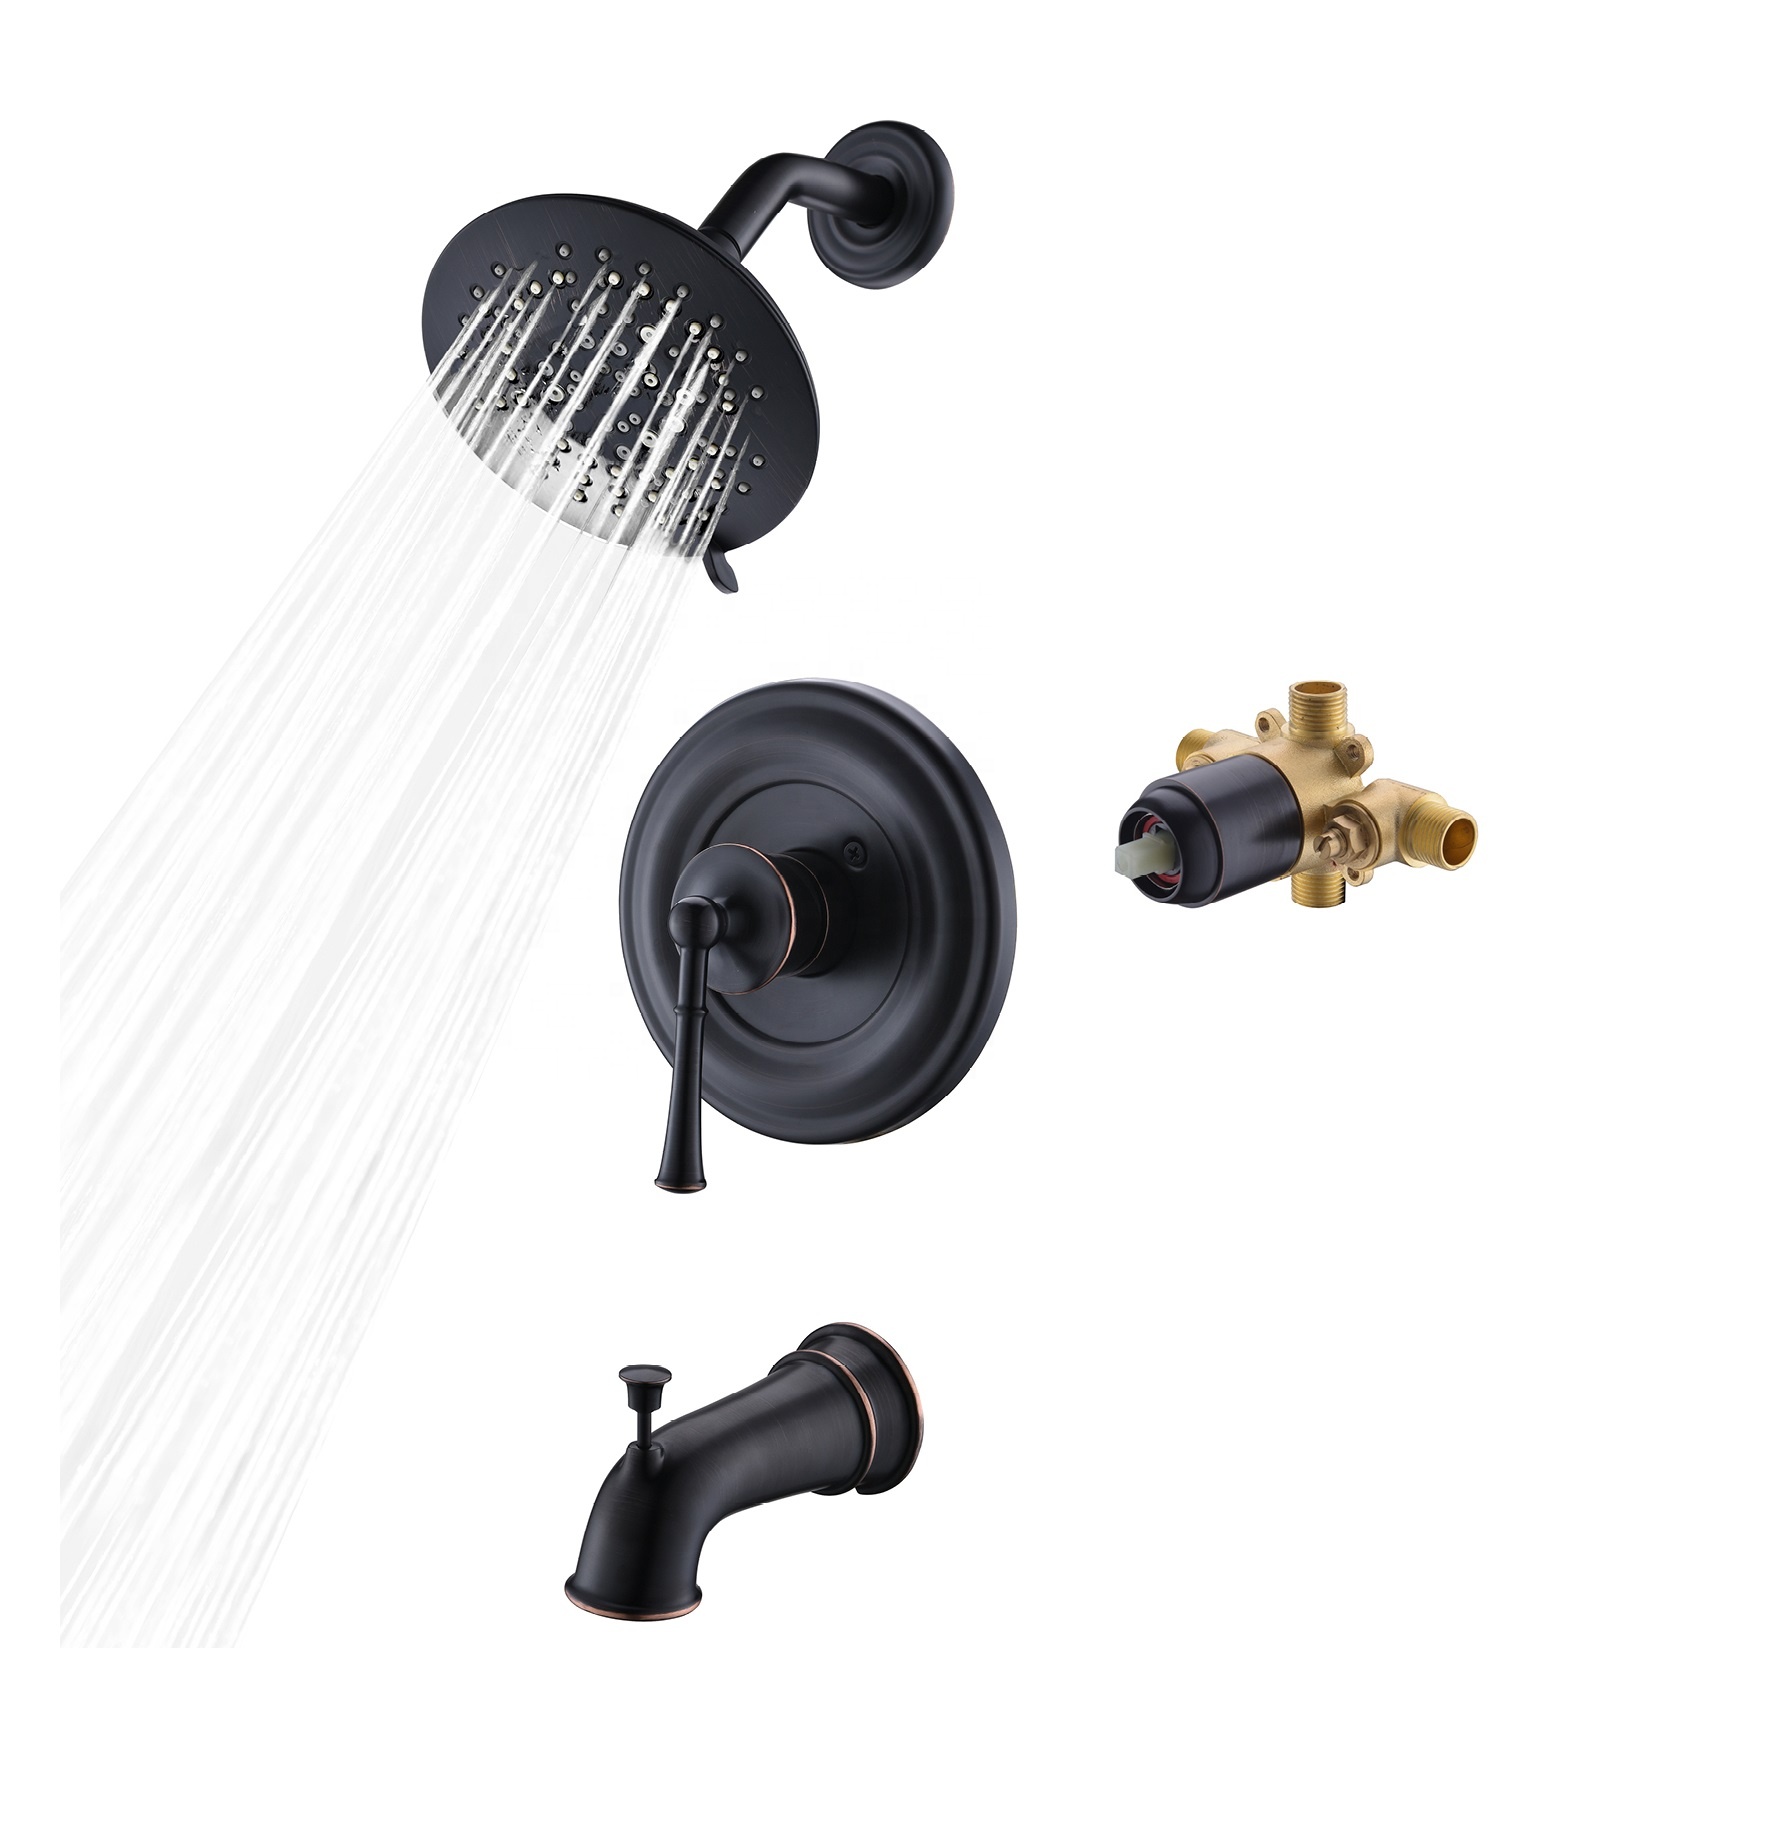 APT122-ORB Shower Head And Faucet Set For Tub Small Body Brass Bathtub Faucet Hidden Wall Shower Faucet